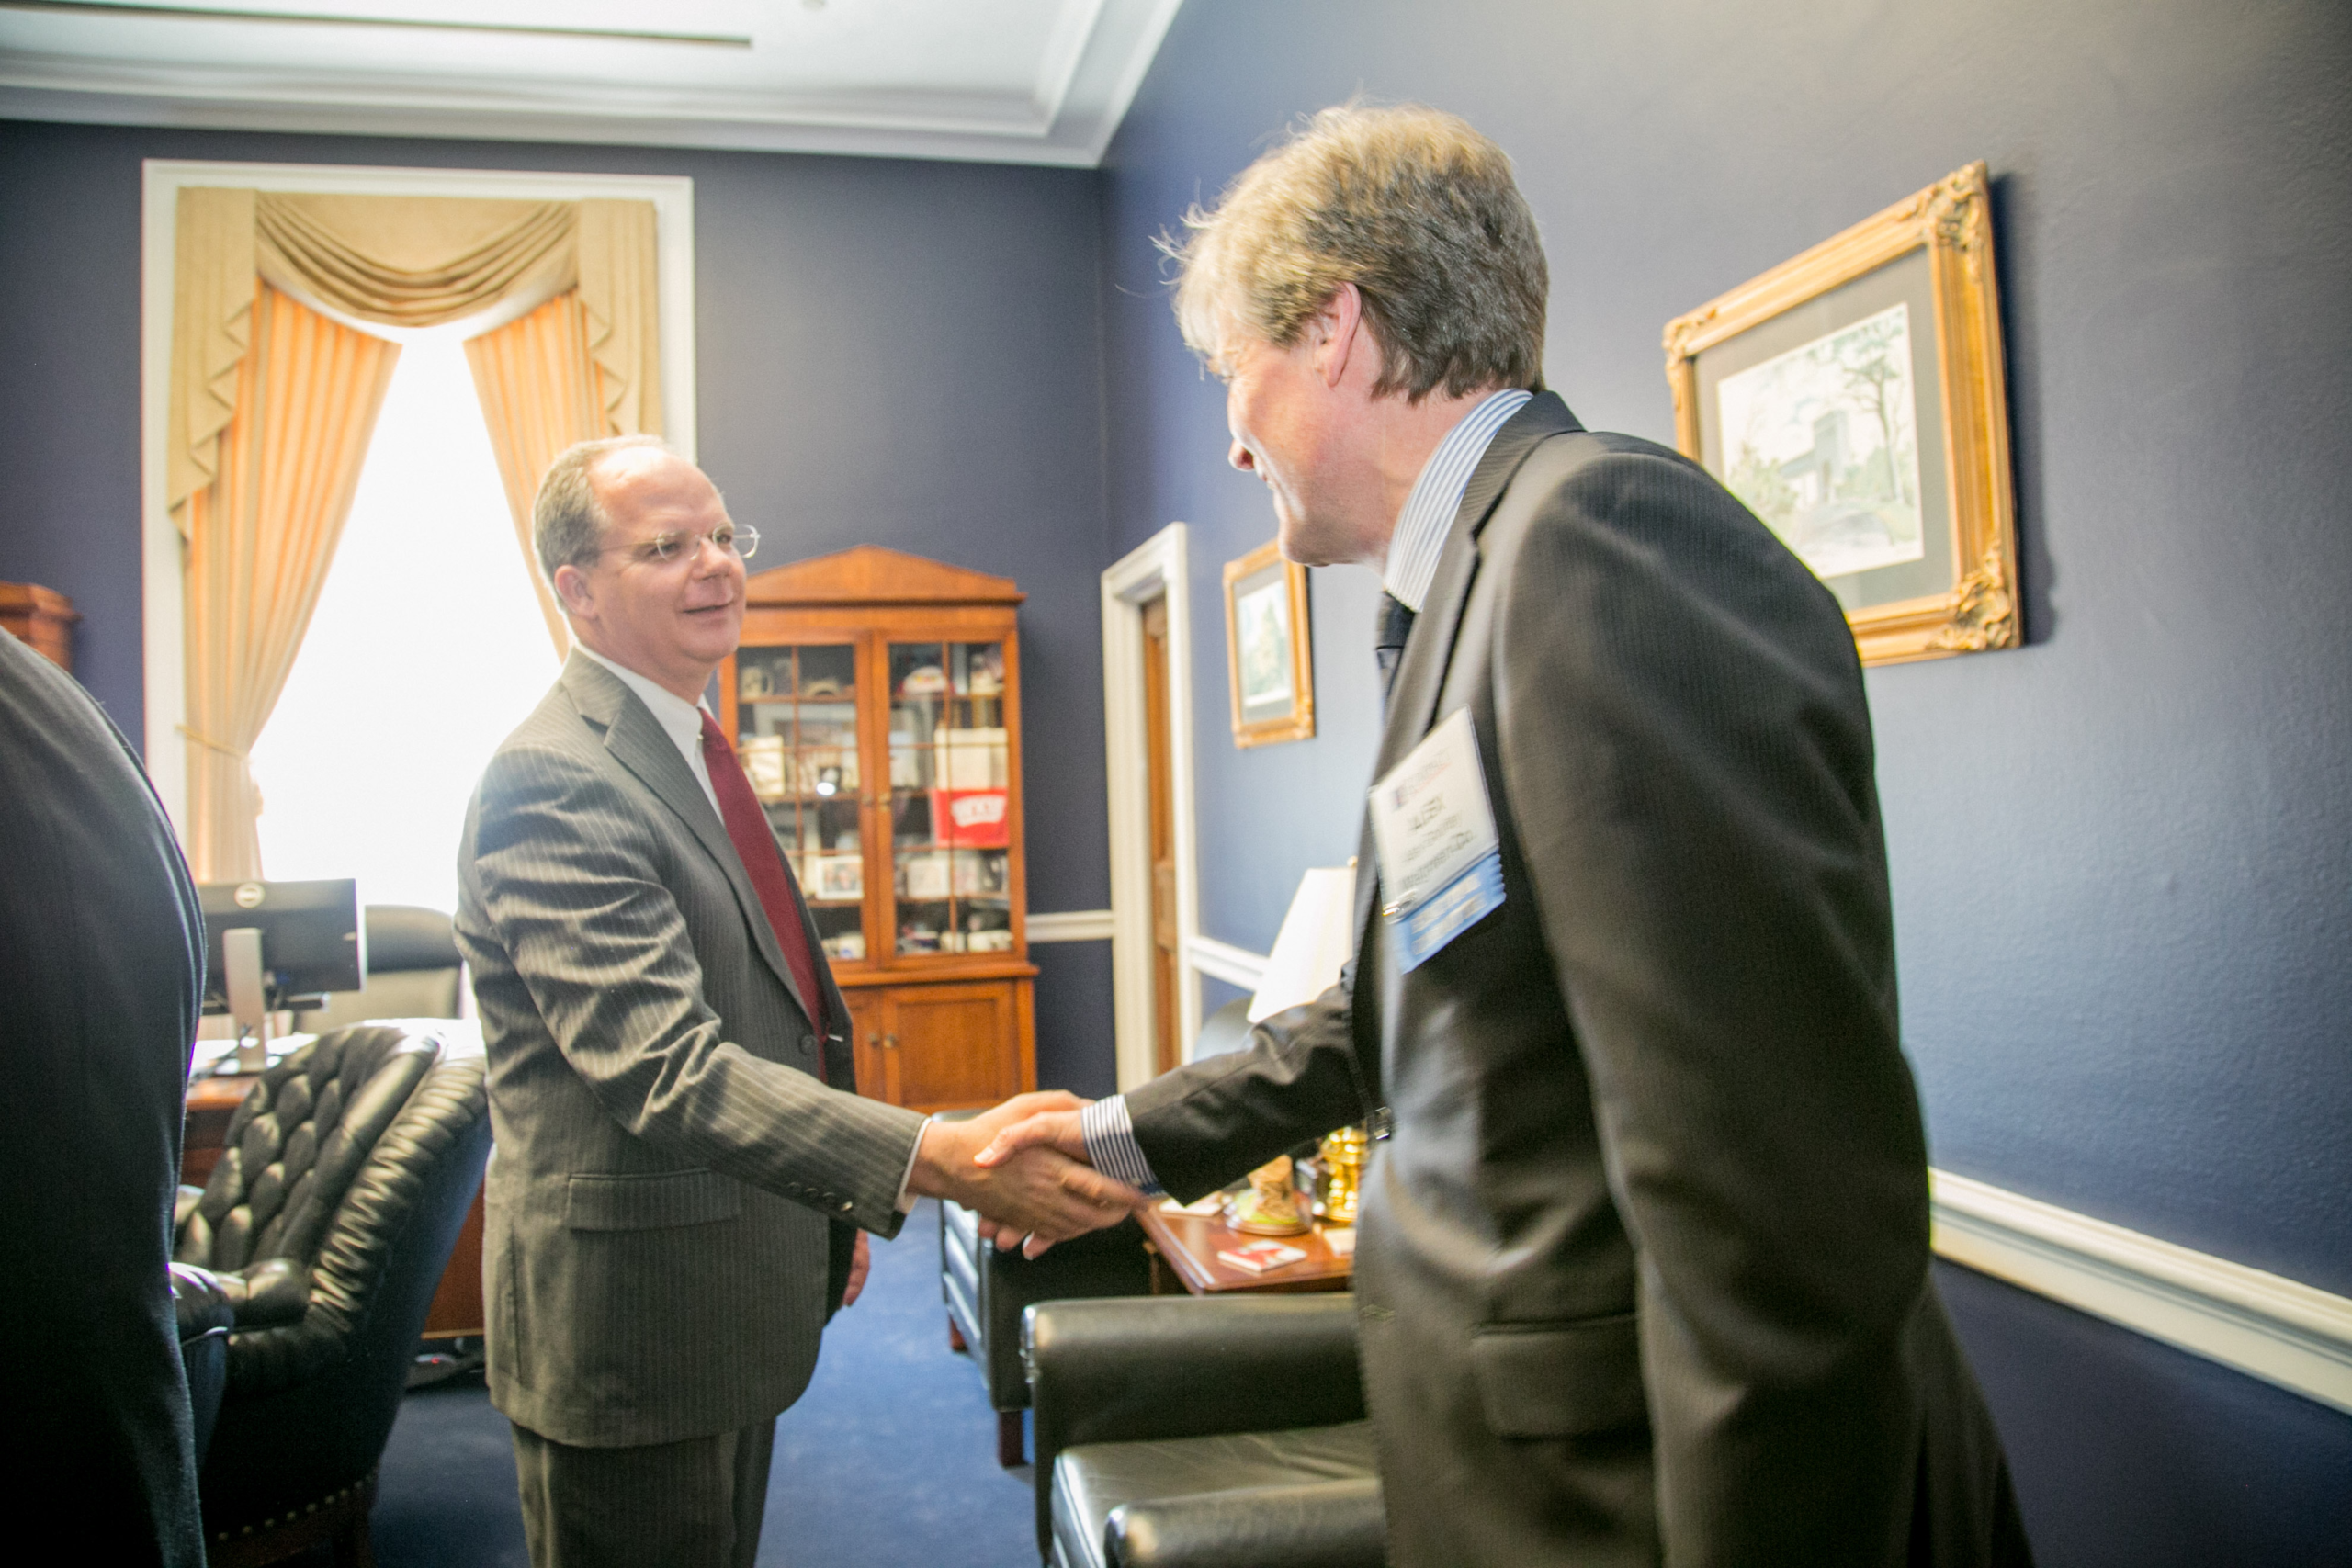 Rep. Brett Guthrie (R-KY) met with Co-Chief Operating Officer of Walgreens Boots Alliance Alex Gourlay, NACDS vice chairman, at the 2016 NACDS RxIMPACT Day on Capitol Hill. Rep. Guthrie was a lead sponsor of NACDS-backed pharmacist provider status legislation in the previous Congress, and will be one of the members re-introducing the bill in the House in the coming days. The bill was reintroduced in the Senate on Thursday with the bipartisan original co-sponsorship of more than one-quarter of the Senate.